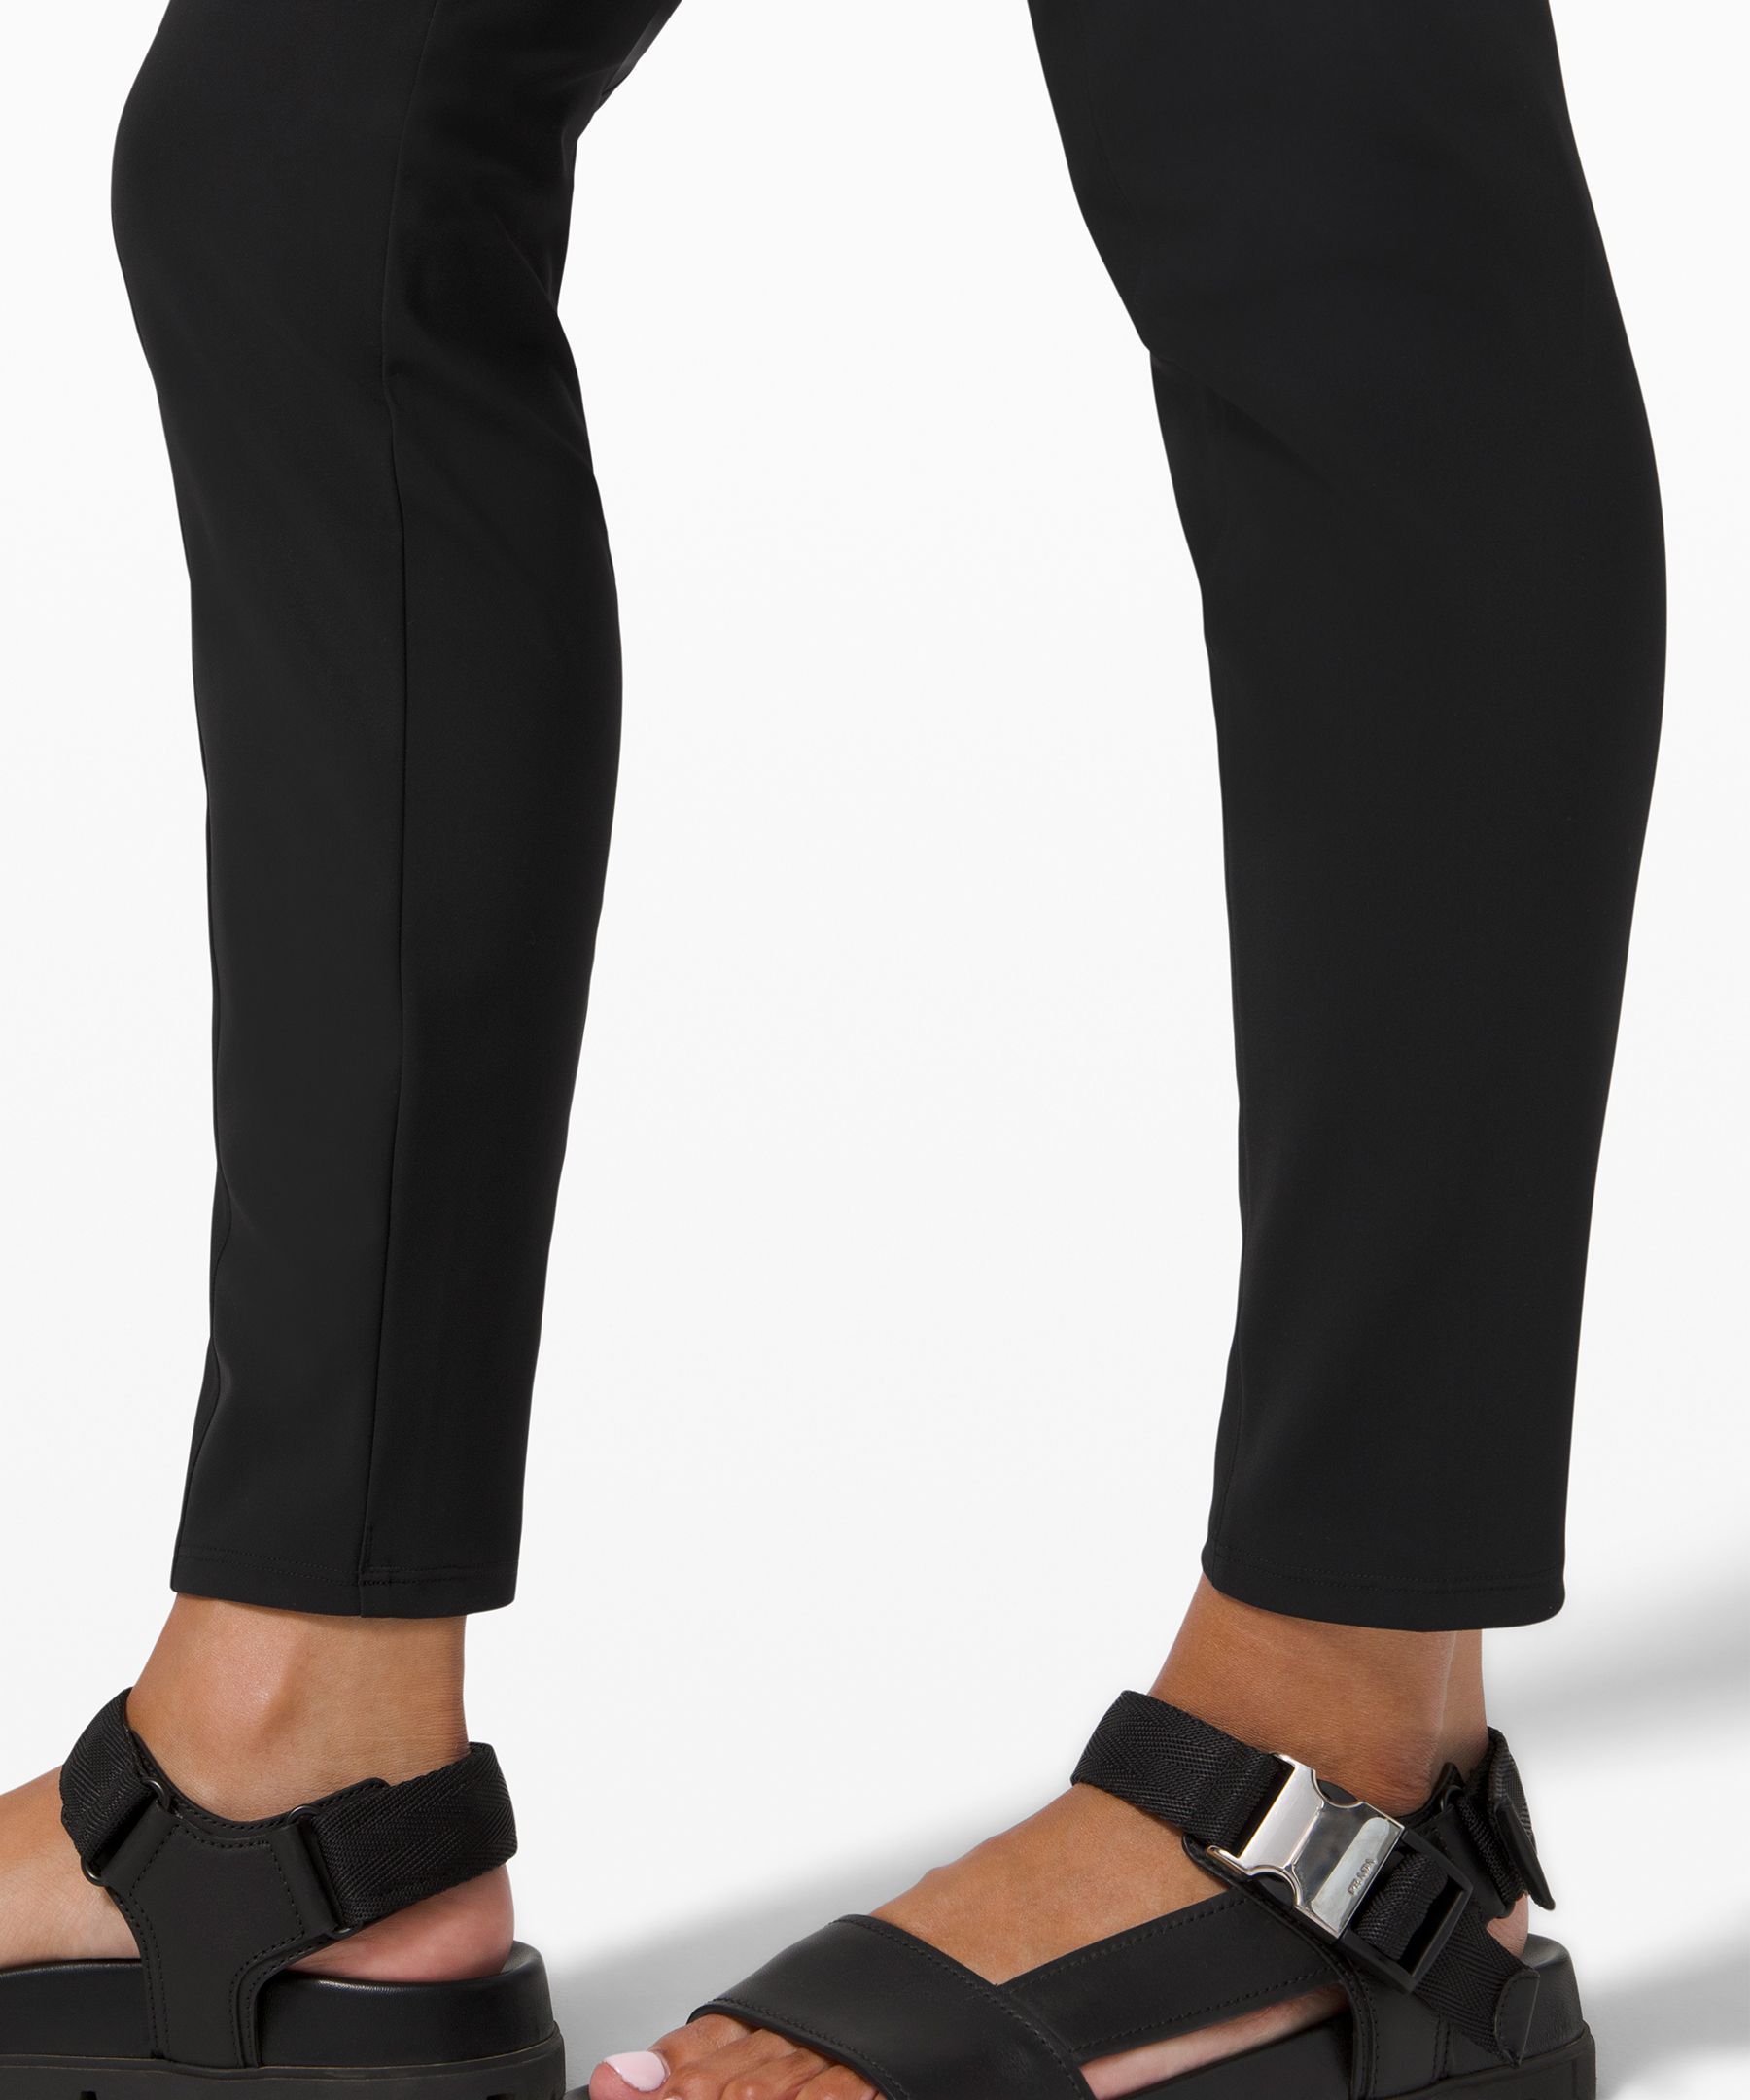 Here to There Pants by Lululemon for $45